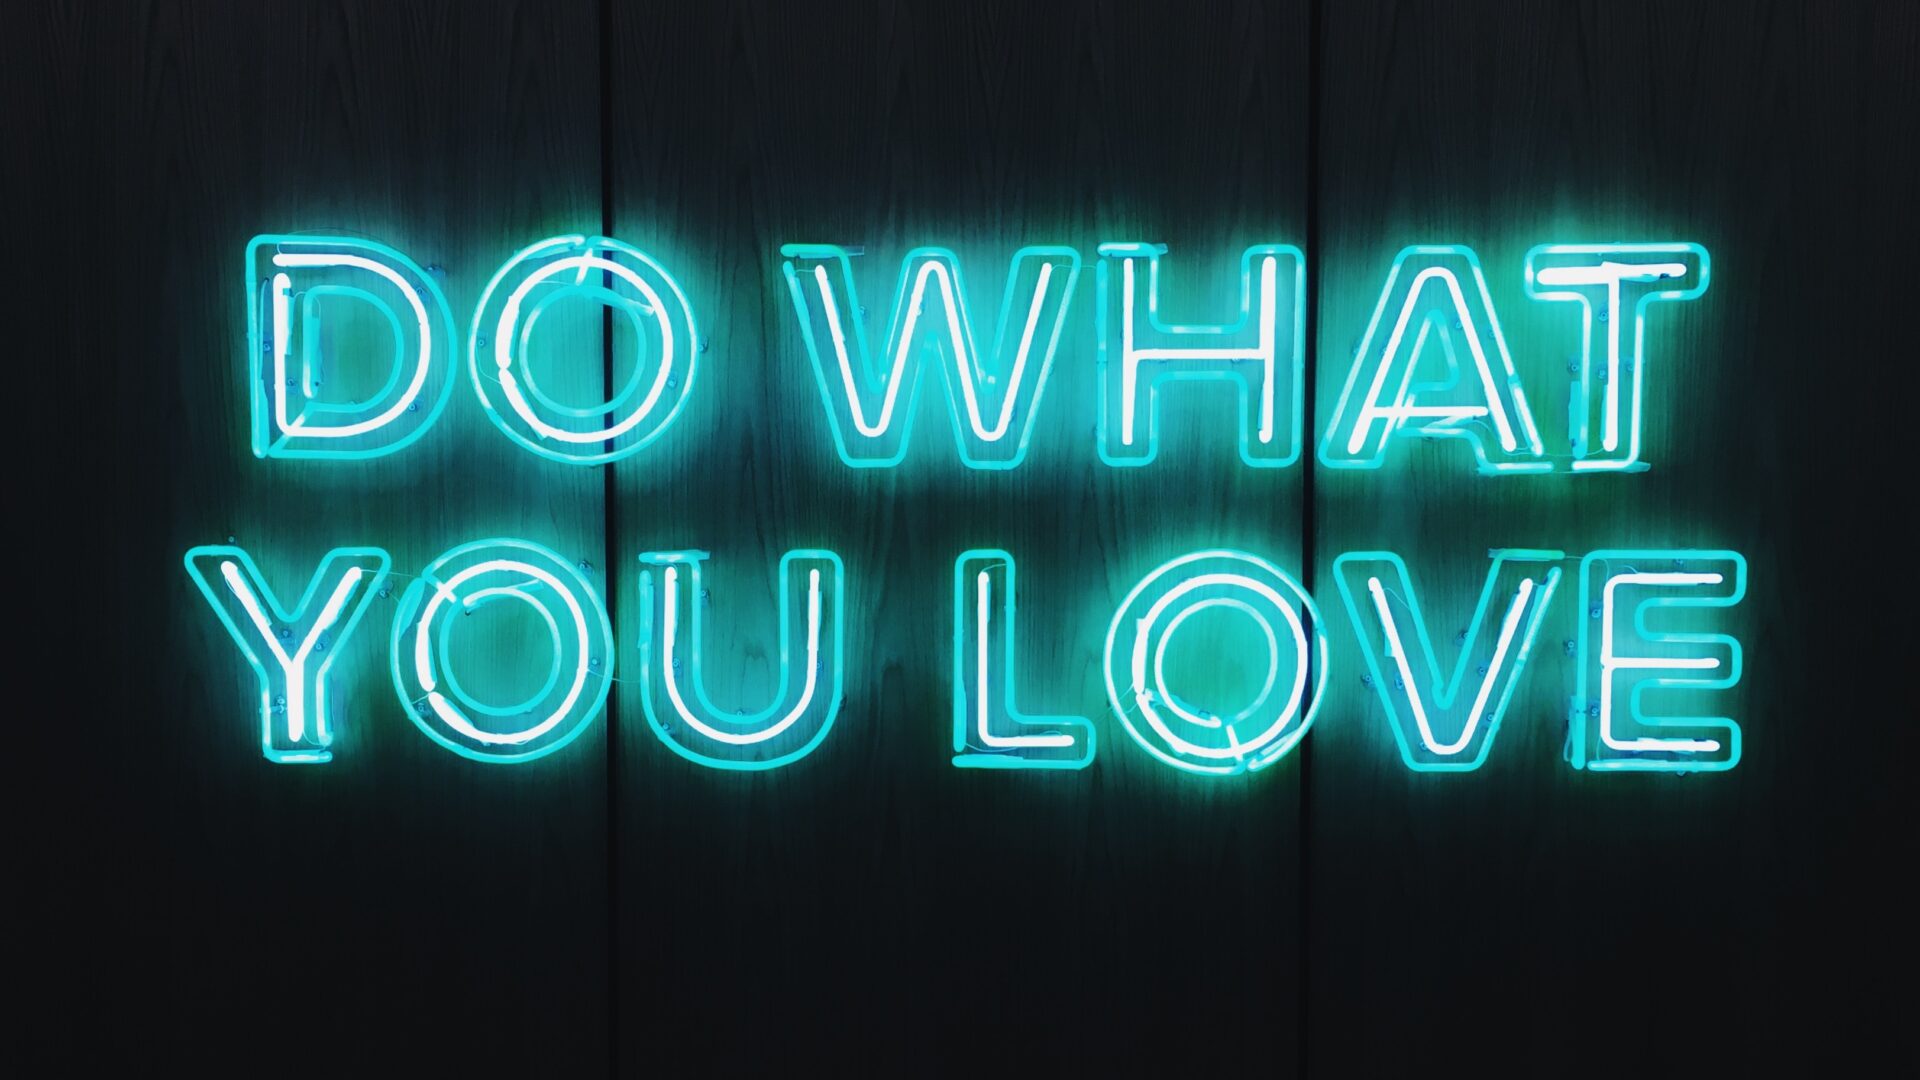 A blue neon sign spelling out "do what you love" in all caps.